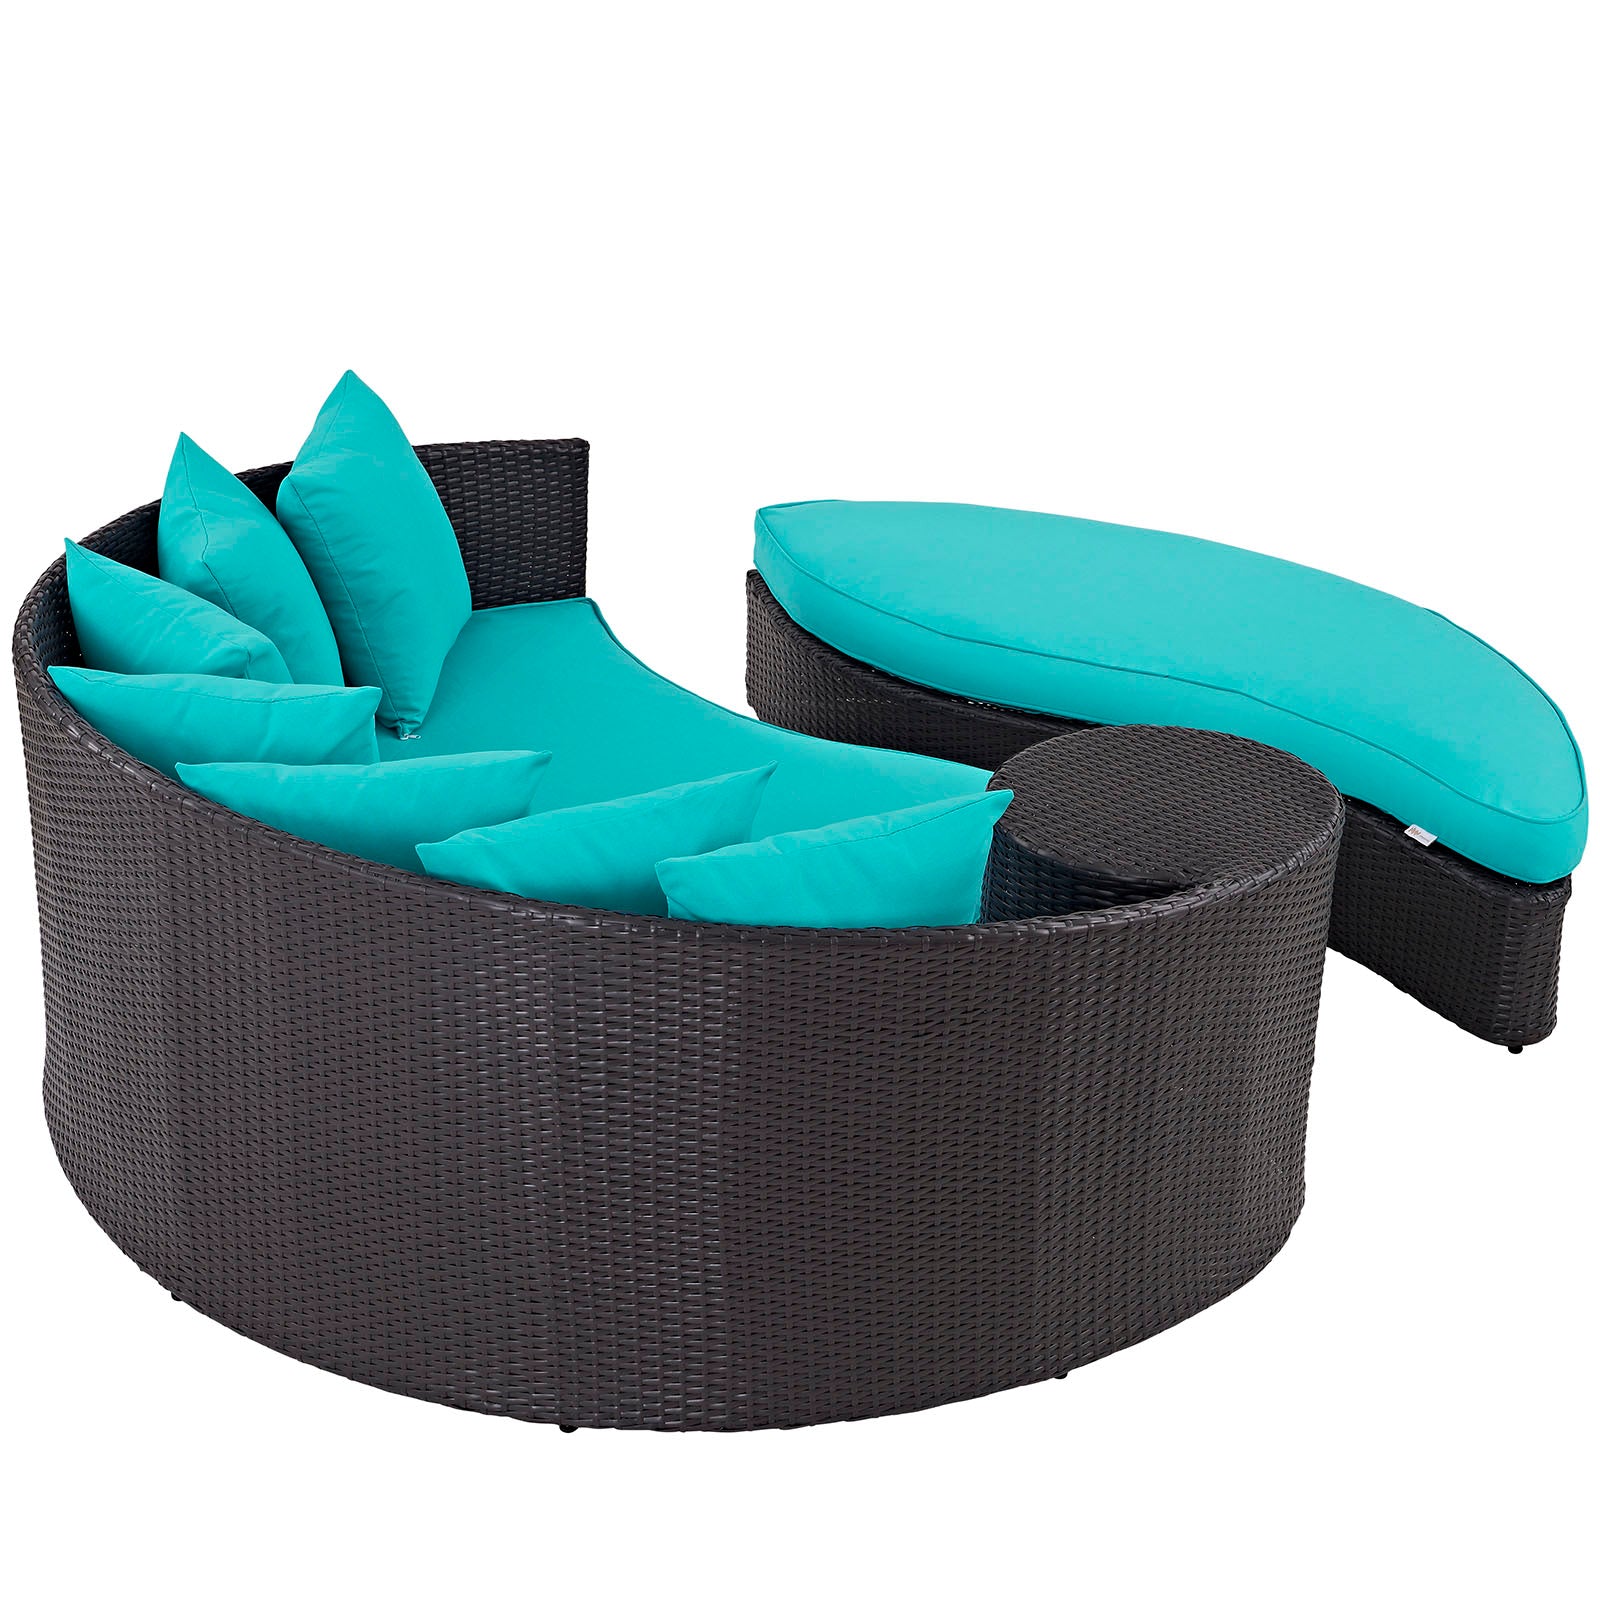 Modway Patio Daybeds - Convene Outdoor Patio Daybed Espresso Turquoise